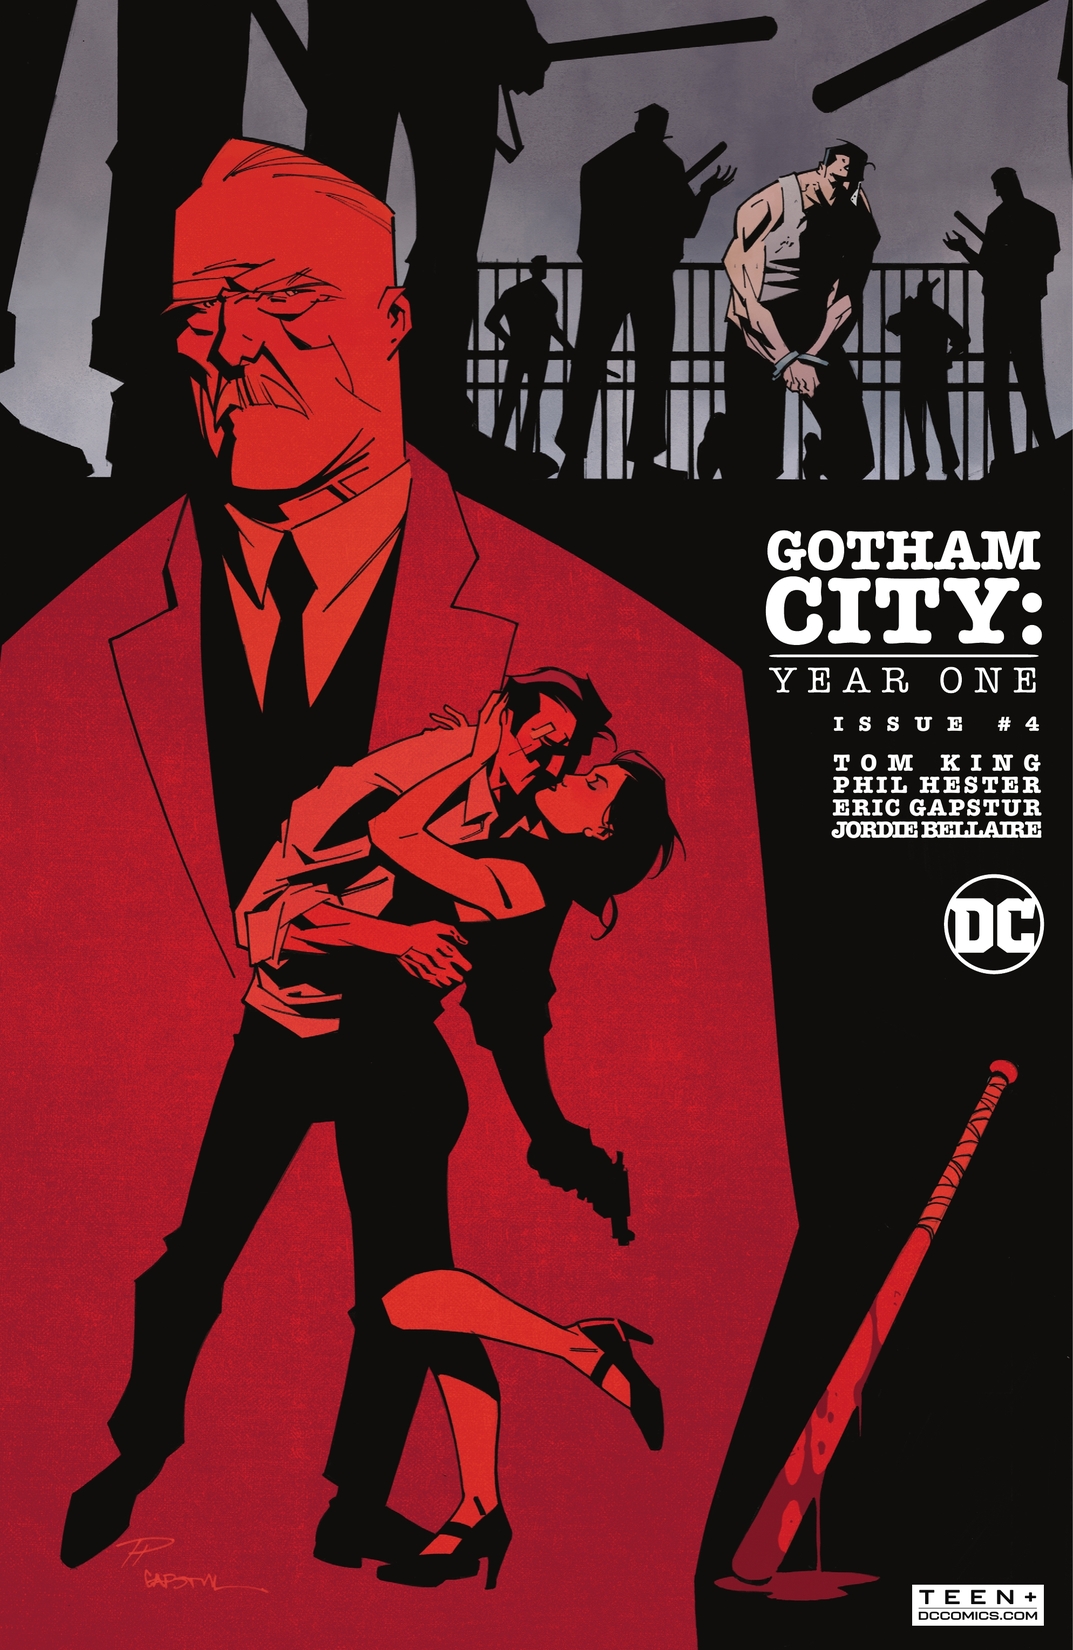 Gotham City: Year One #4 preview images